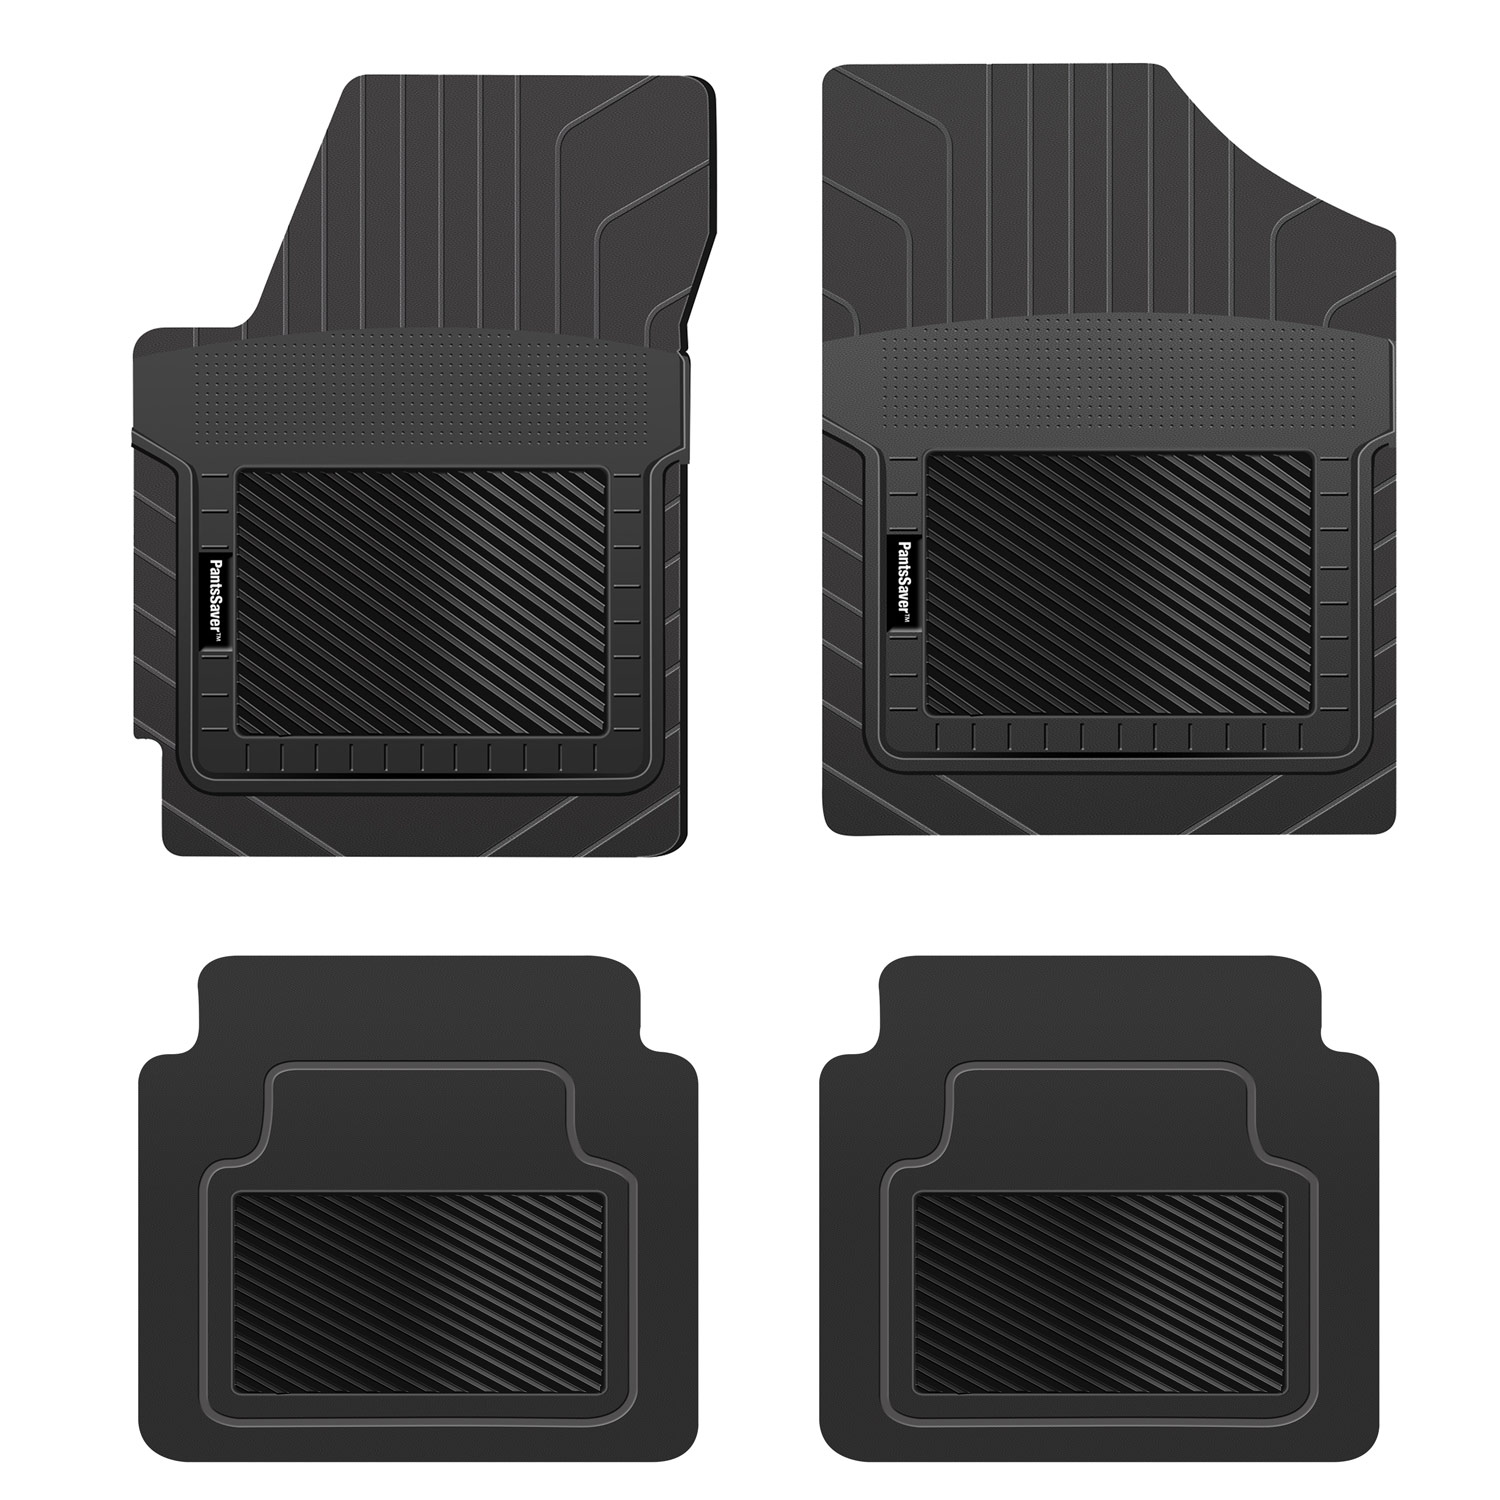 PantsSaver Custom Fit Car Floor Mats for Jeep Compass 2007, 4 pc, All Weather Protection for vehicles, Heavy Duty Weather Resistant Plastic,Black - image 1 of 9